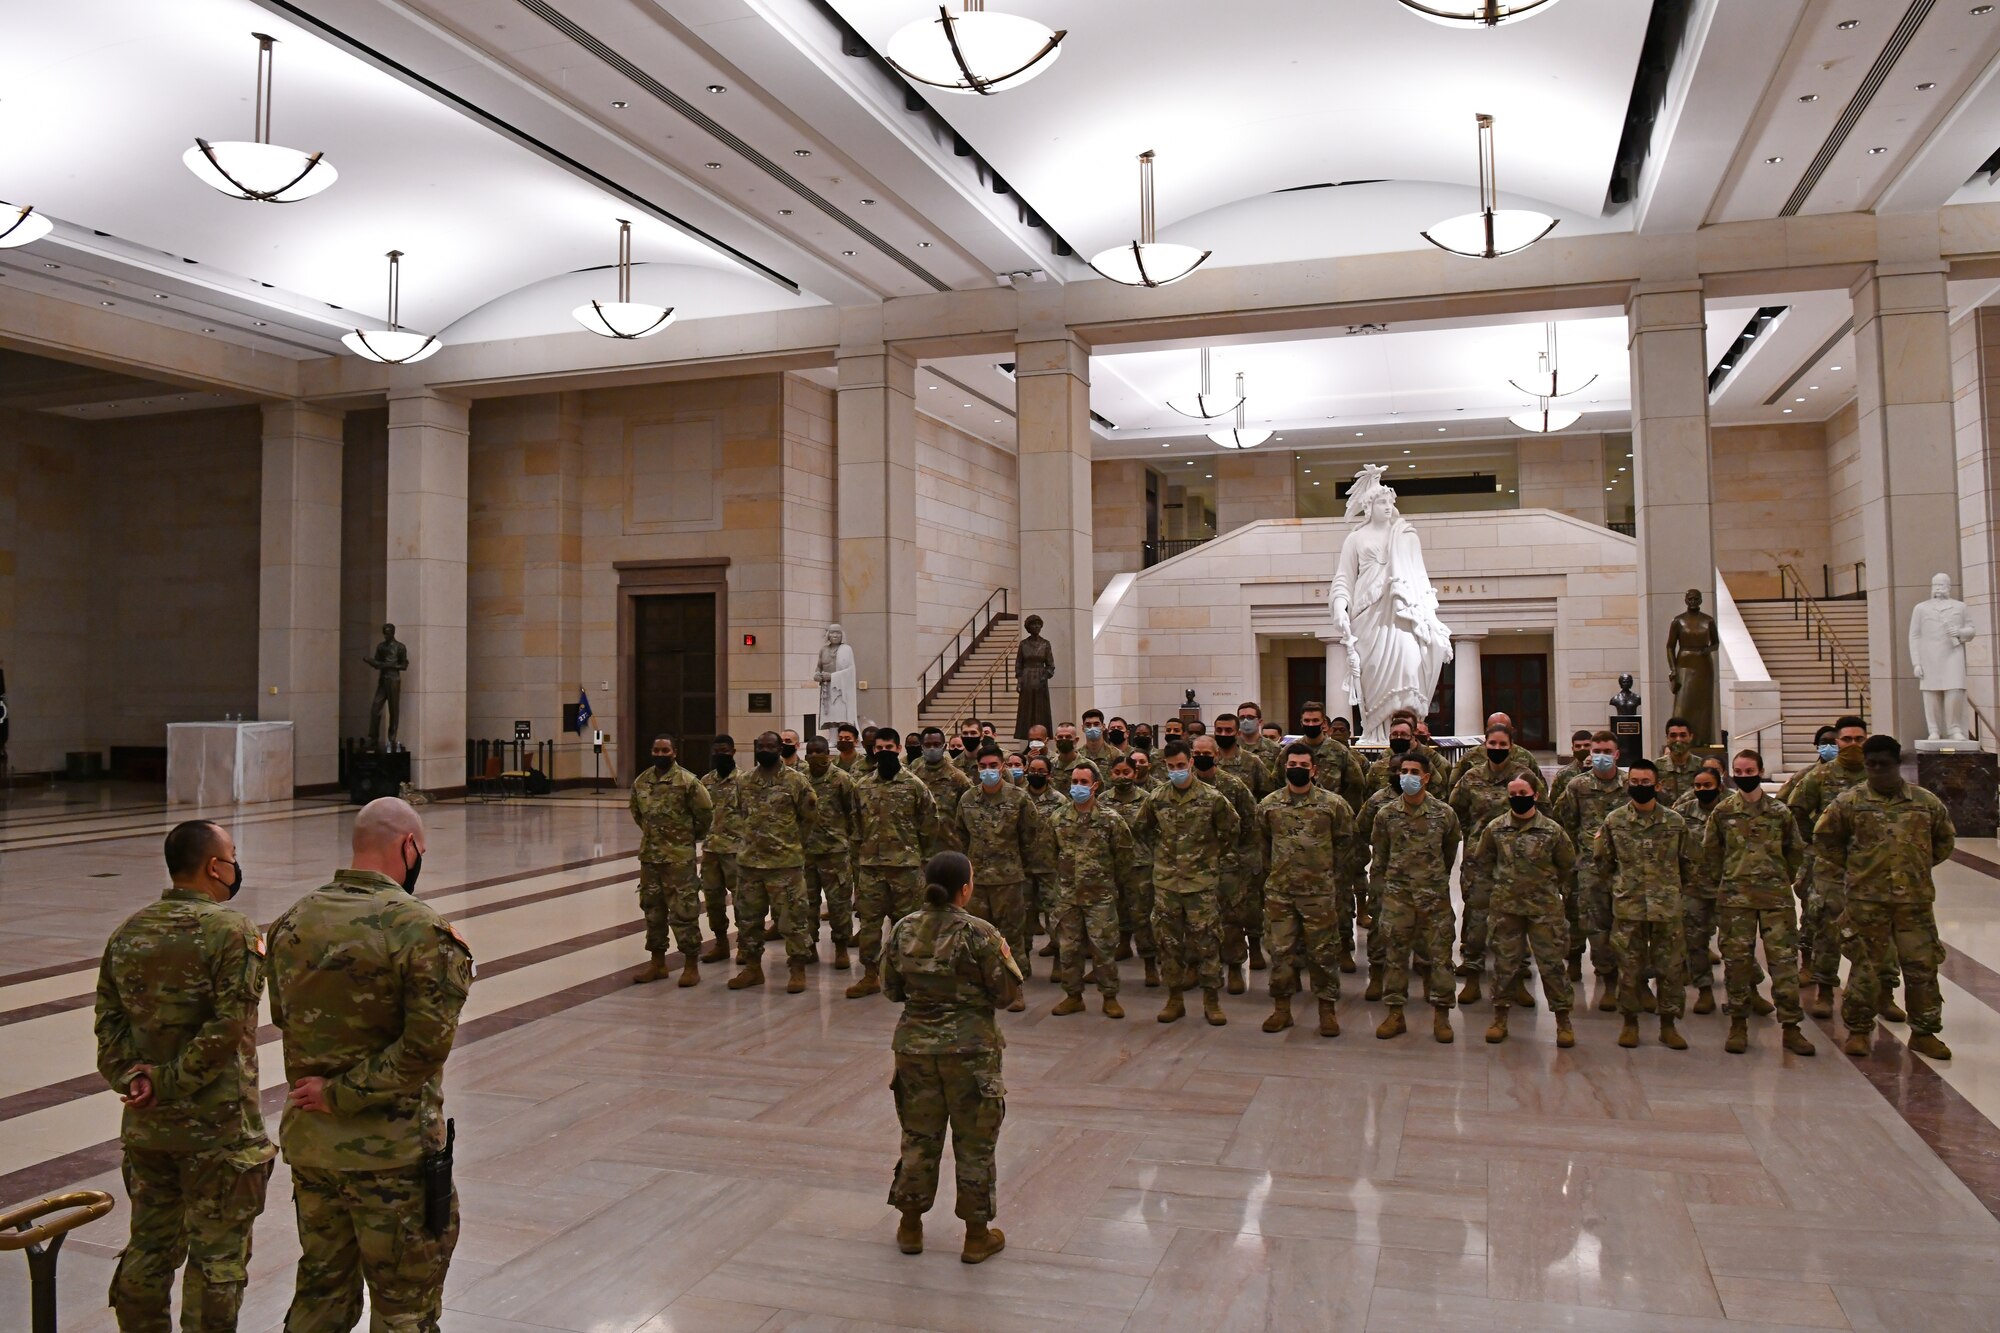 U.S. Army Capt. Tiffany Pelrine, center, 272nd Chemical Company commander with the Massachusetts National Guard, addresses a formation during a combined promotion and award ceremony at the U.S. Capitol building in Washington, D.C., May 21, 2021. The National Guard has been requested to continue supporting federal law enforcement agencies with security, communications, medical evacuation, logistics and safety support to state, district and federal agencies through mid-May. (U.S. Air National Guard photo by Staff Sgt. Hanna Smith)